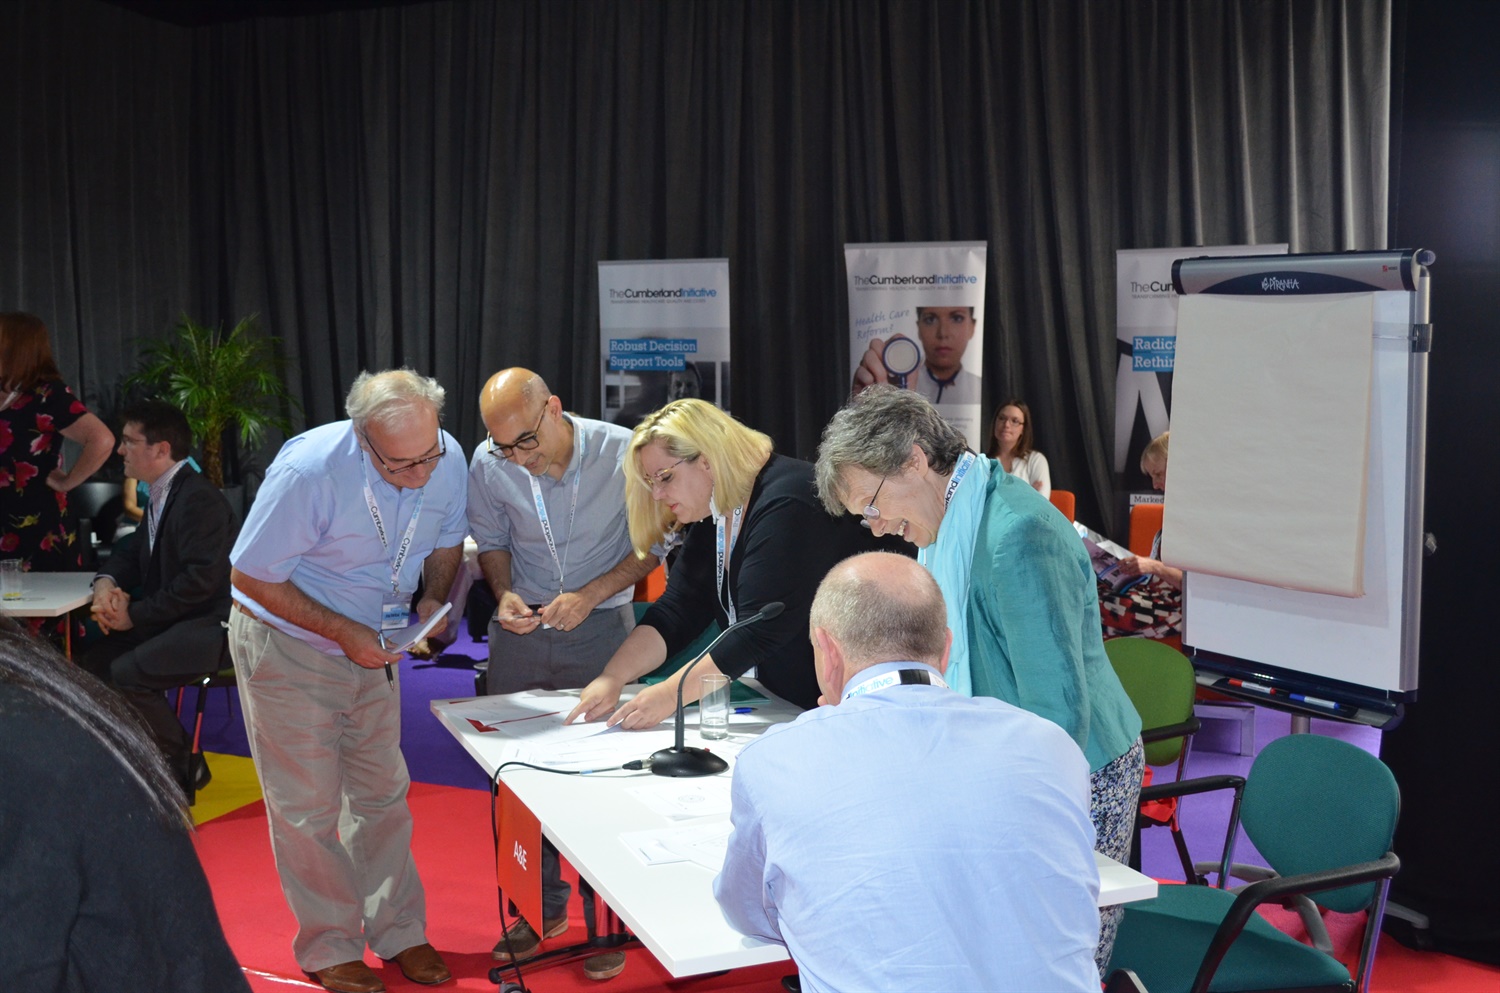 guests - clinicians, academics and computer companies, playing a timed simulation game on meeting AandE targets.  (1)